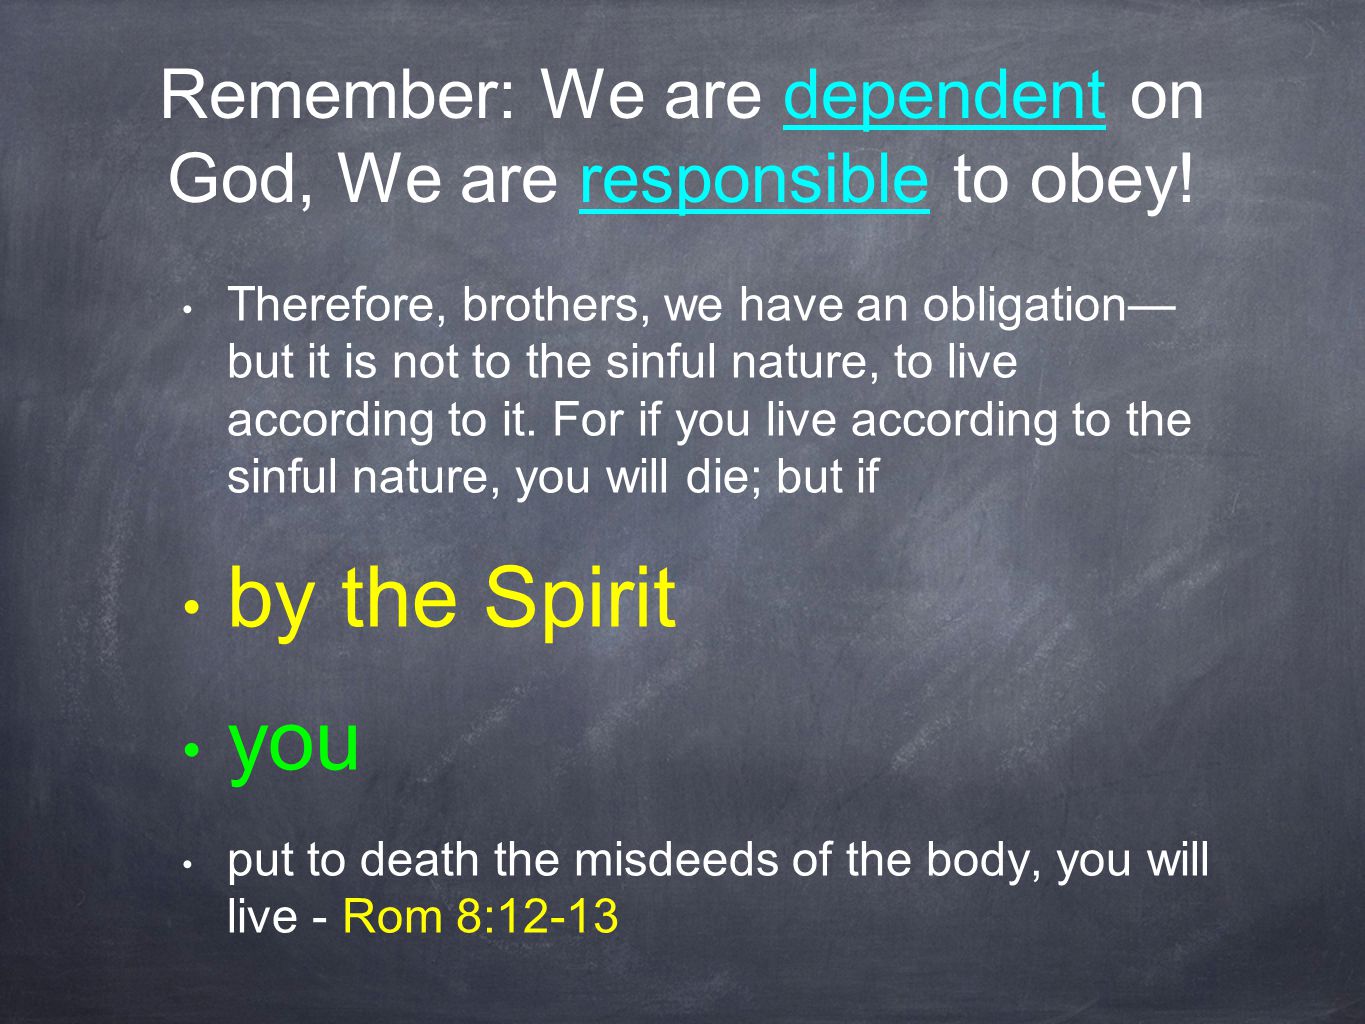 Remember: We are dependent on God, We are responsible to obey.